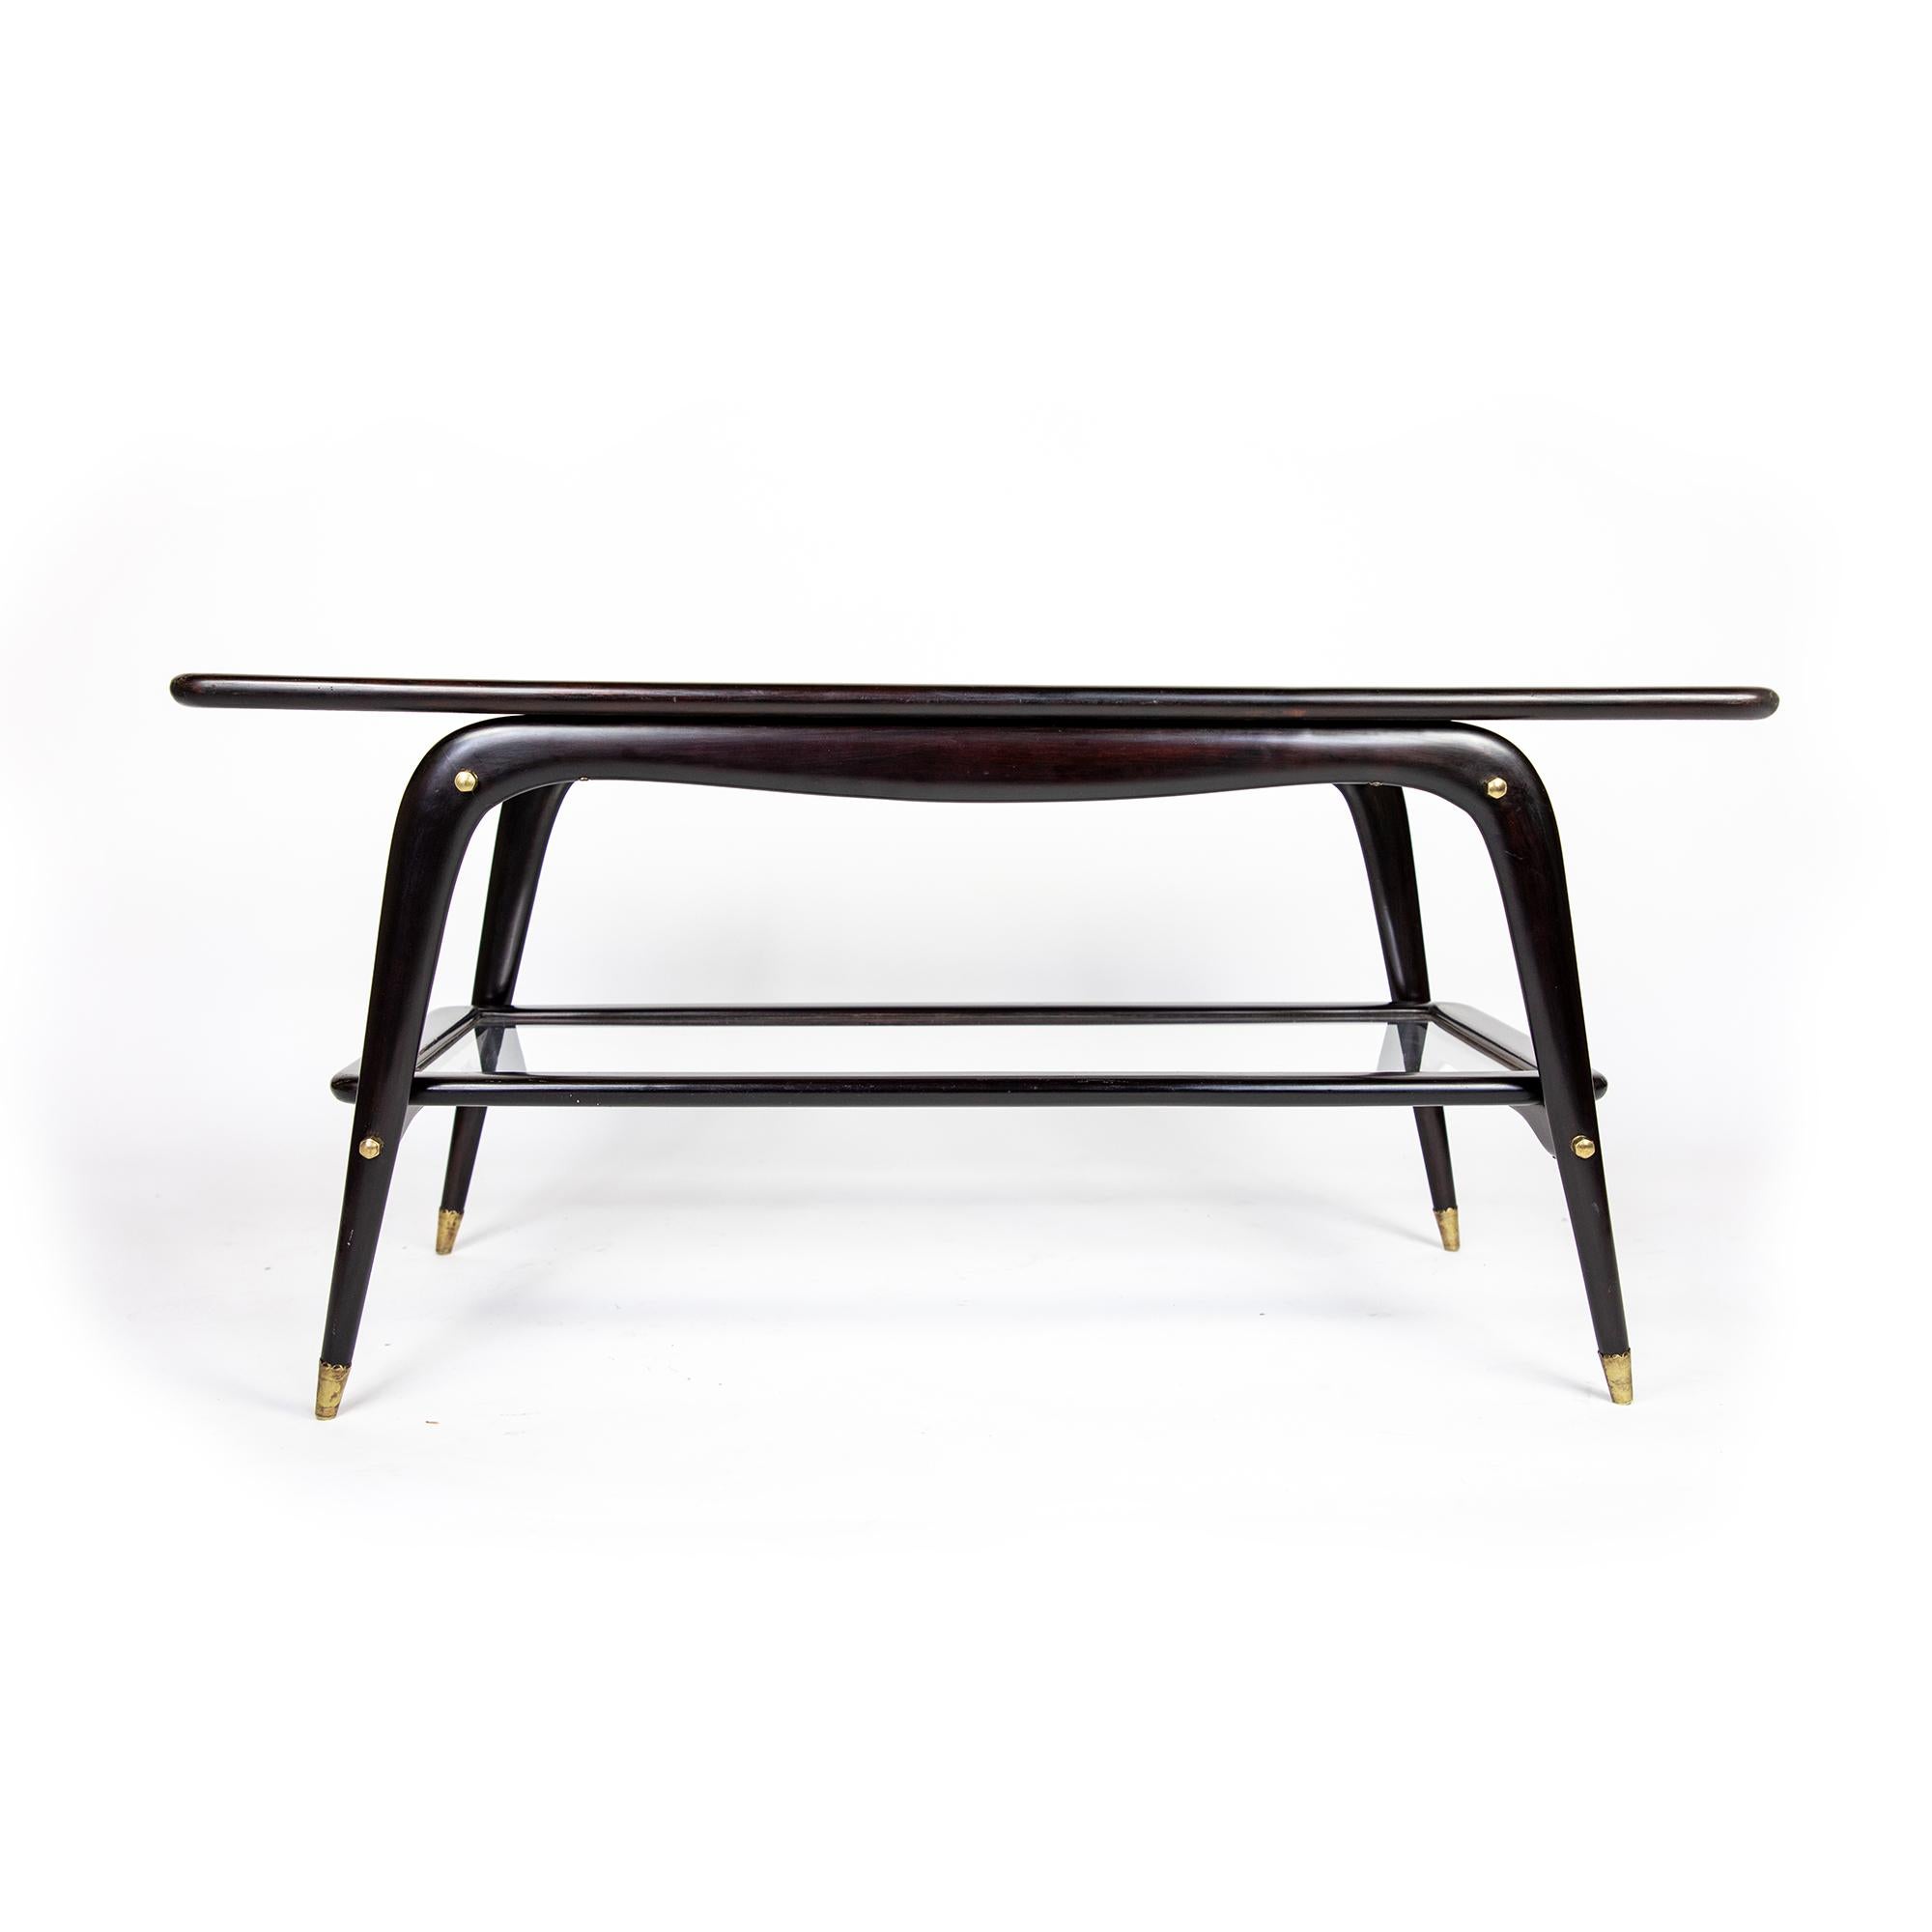 Mid-Century Modern Coffee Table, Cesare Lacca Style, Mahogany Brown, Glass, Brass, Italy 1950s For Sale